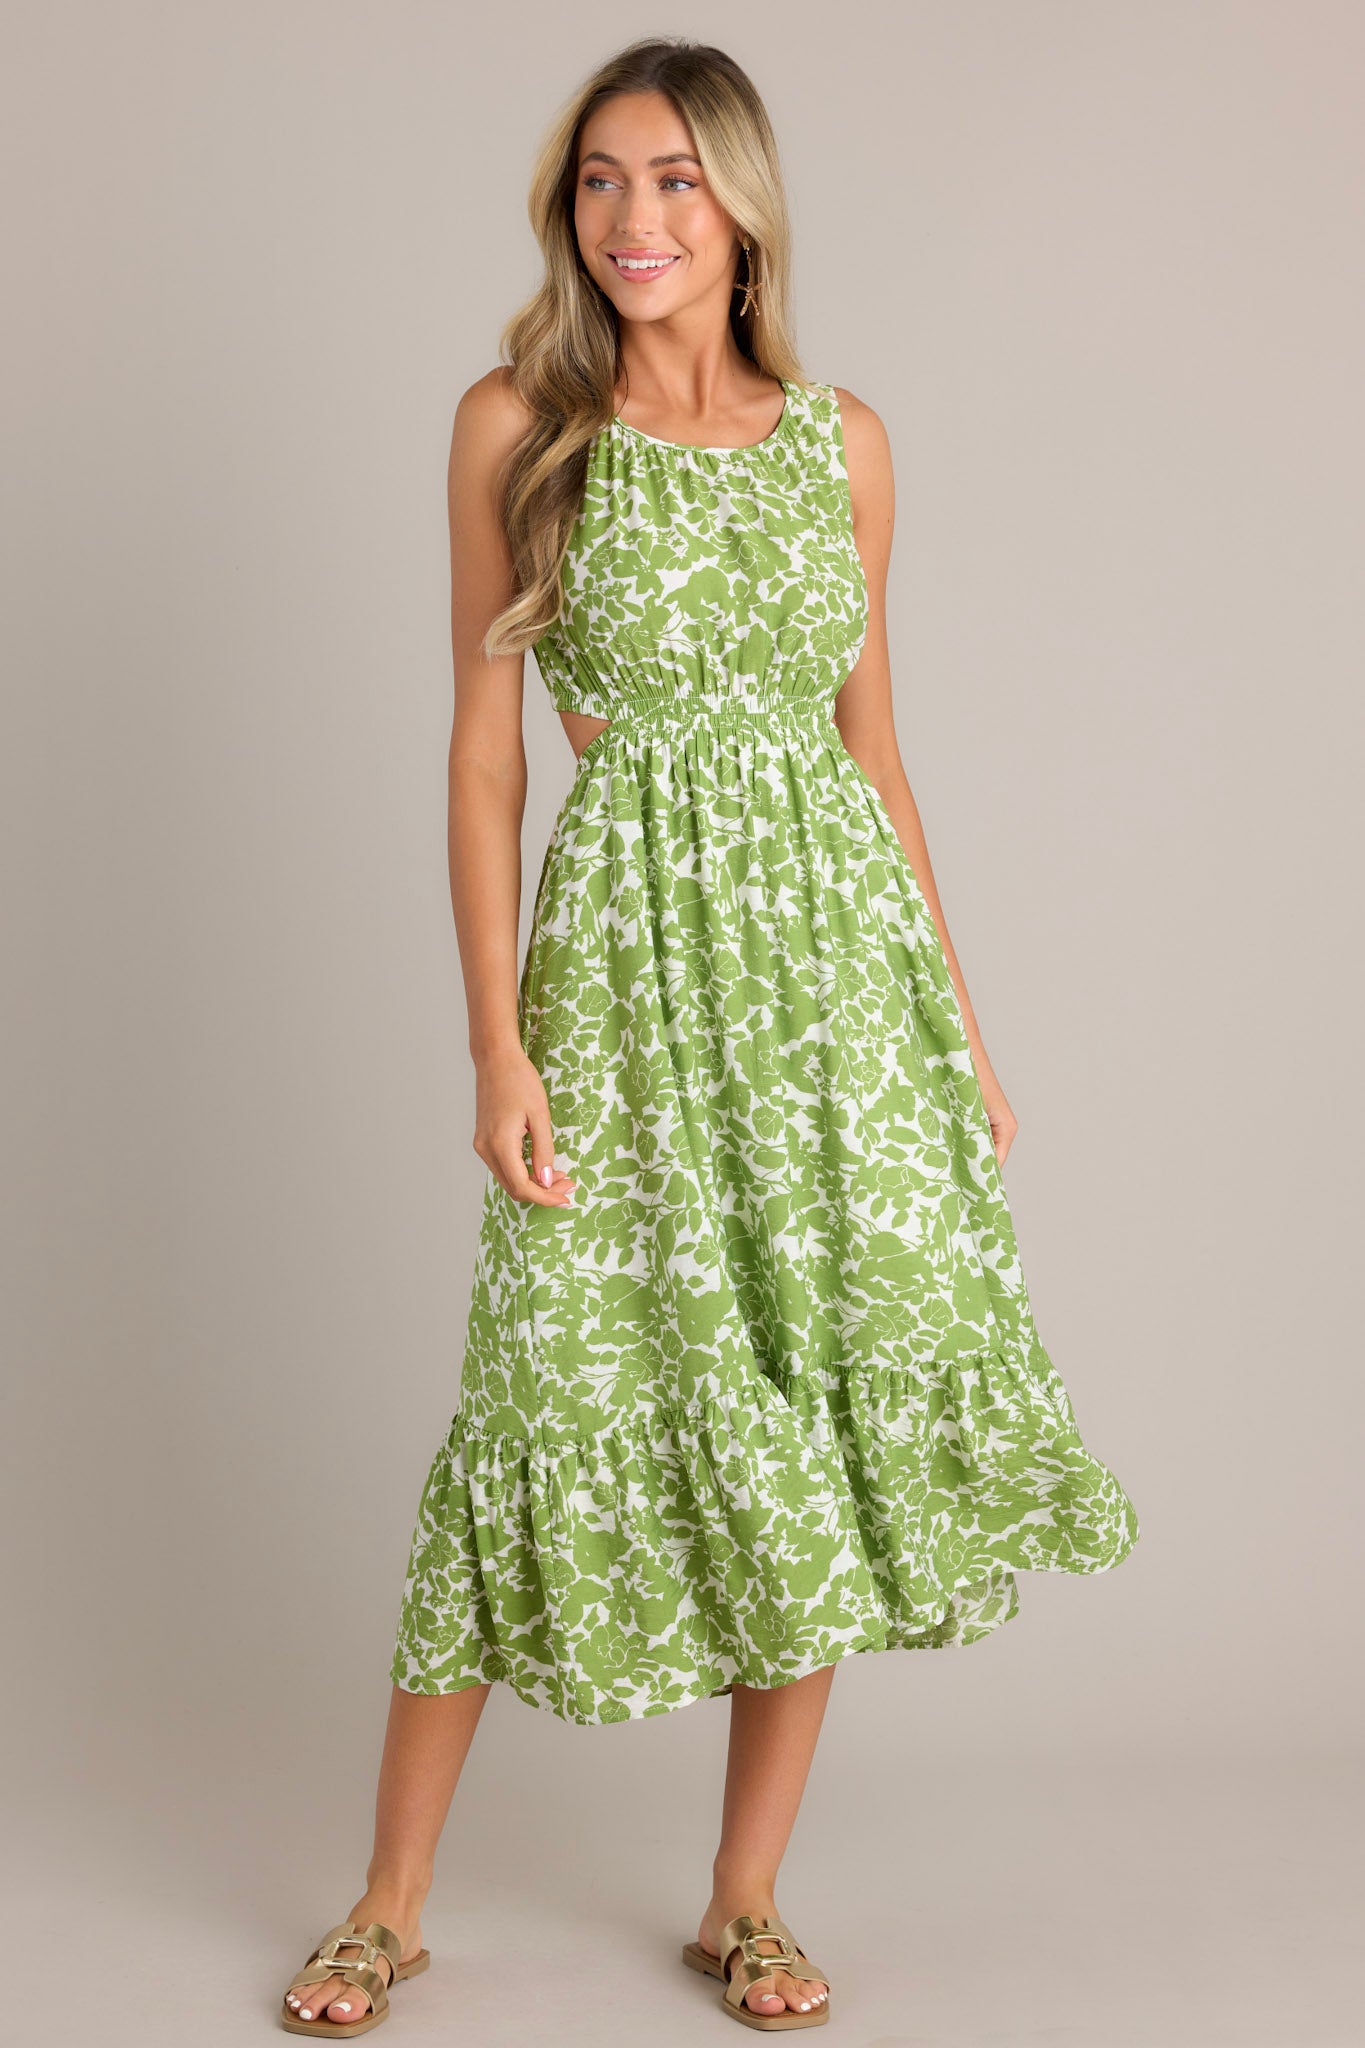 Action shot of a model wearing a green and white floral print sleeveless dress with side cutouts, a gathered waist, and a tiered skirt, highlighting the flow and movement of the dress.